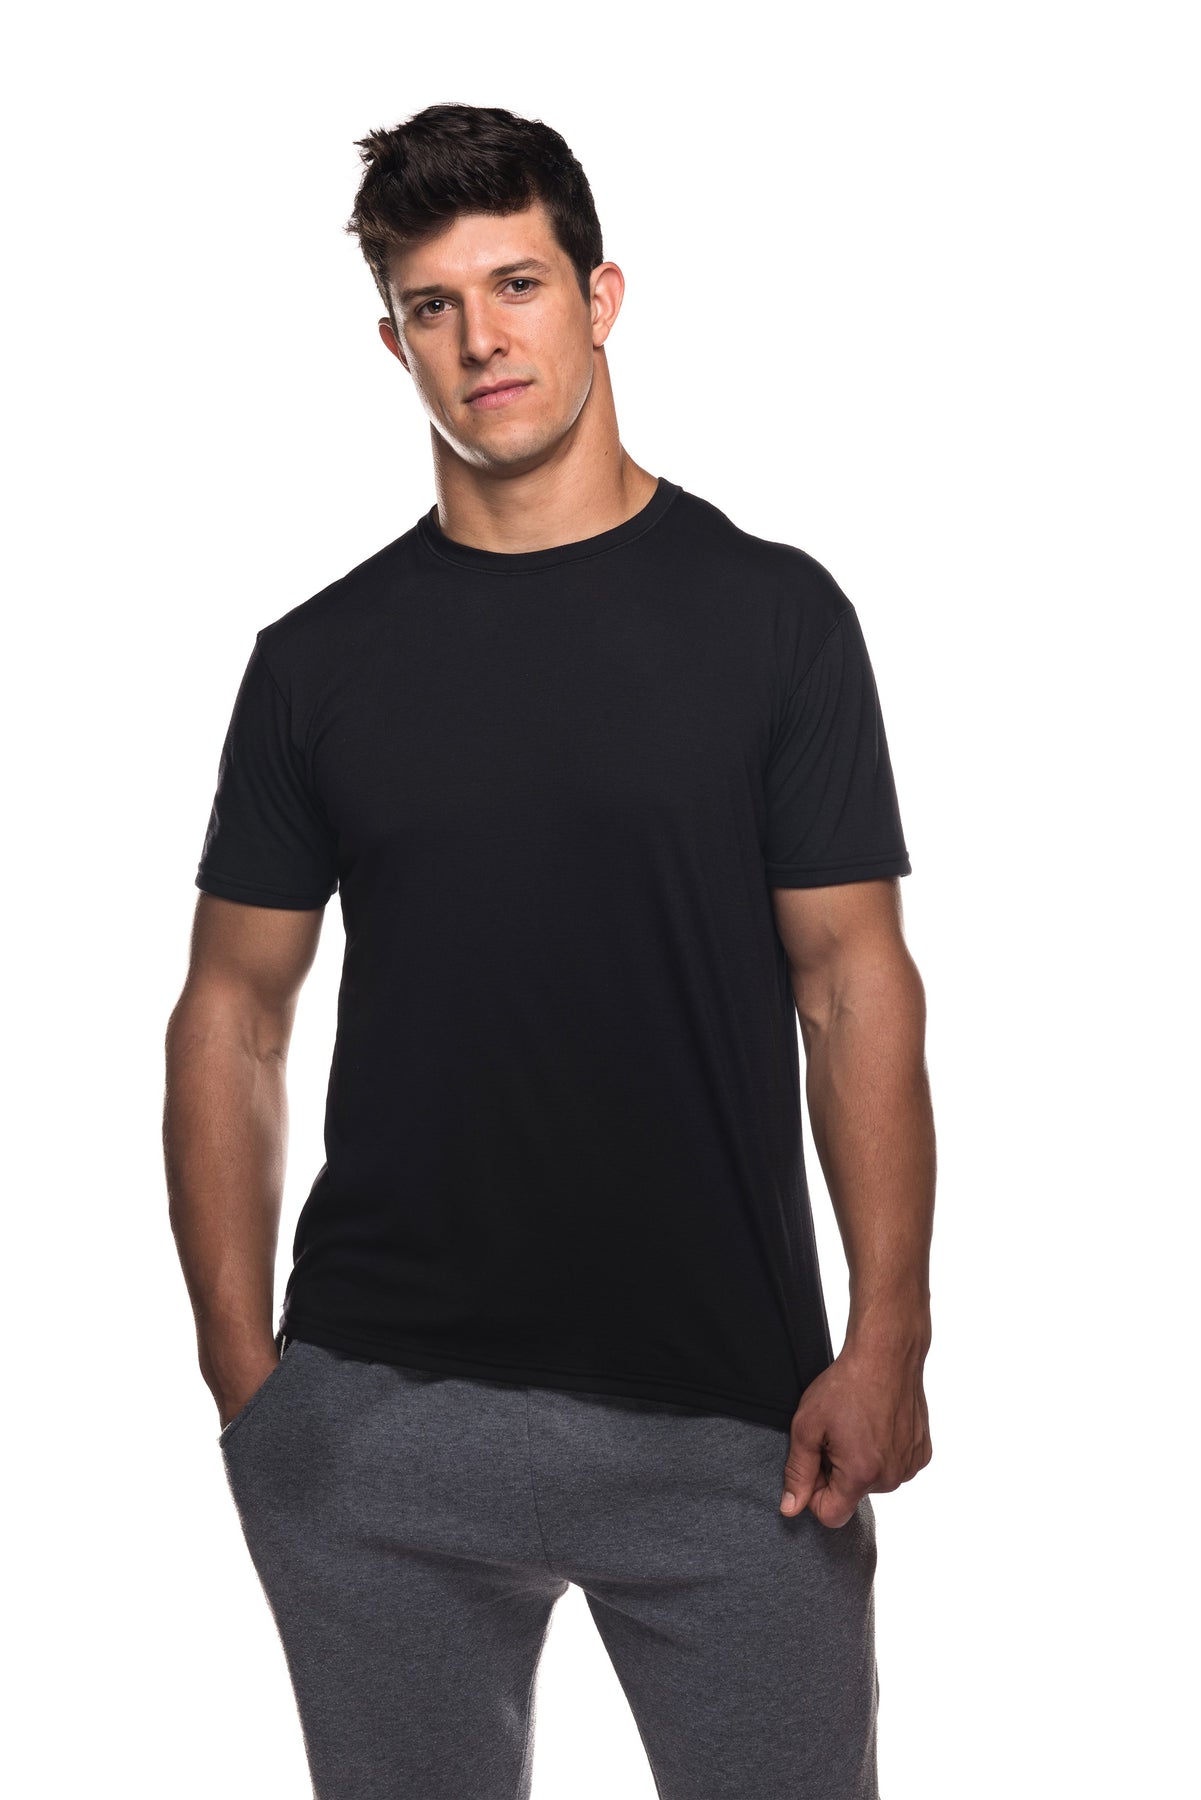 Epic Tee For Men is Made of the Highest Quality Comfortable Fabric ...